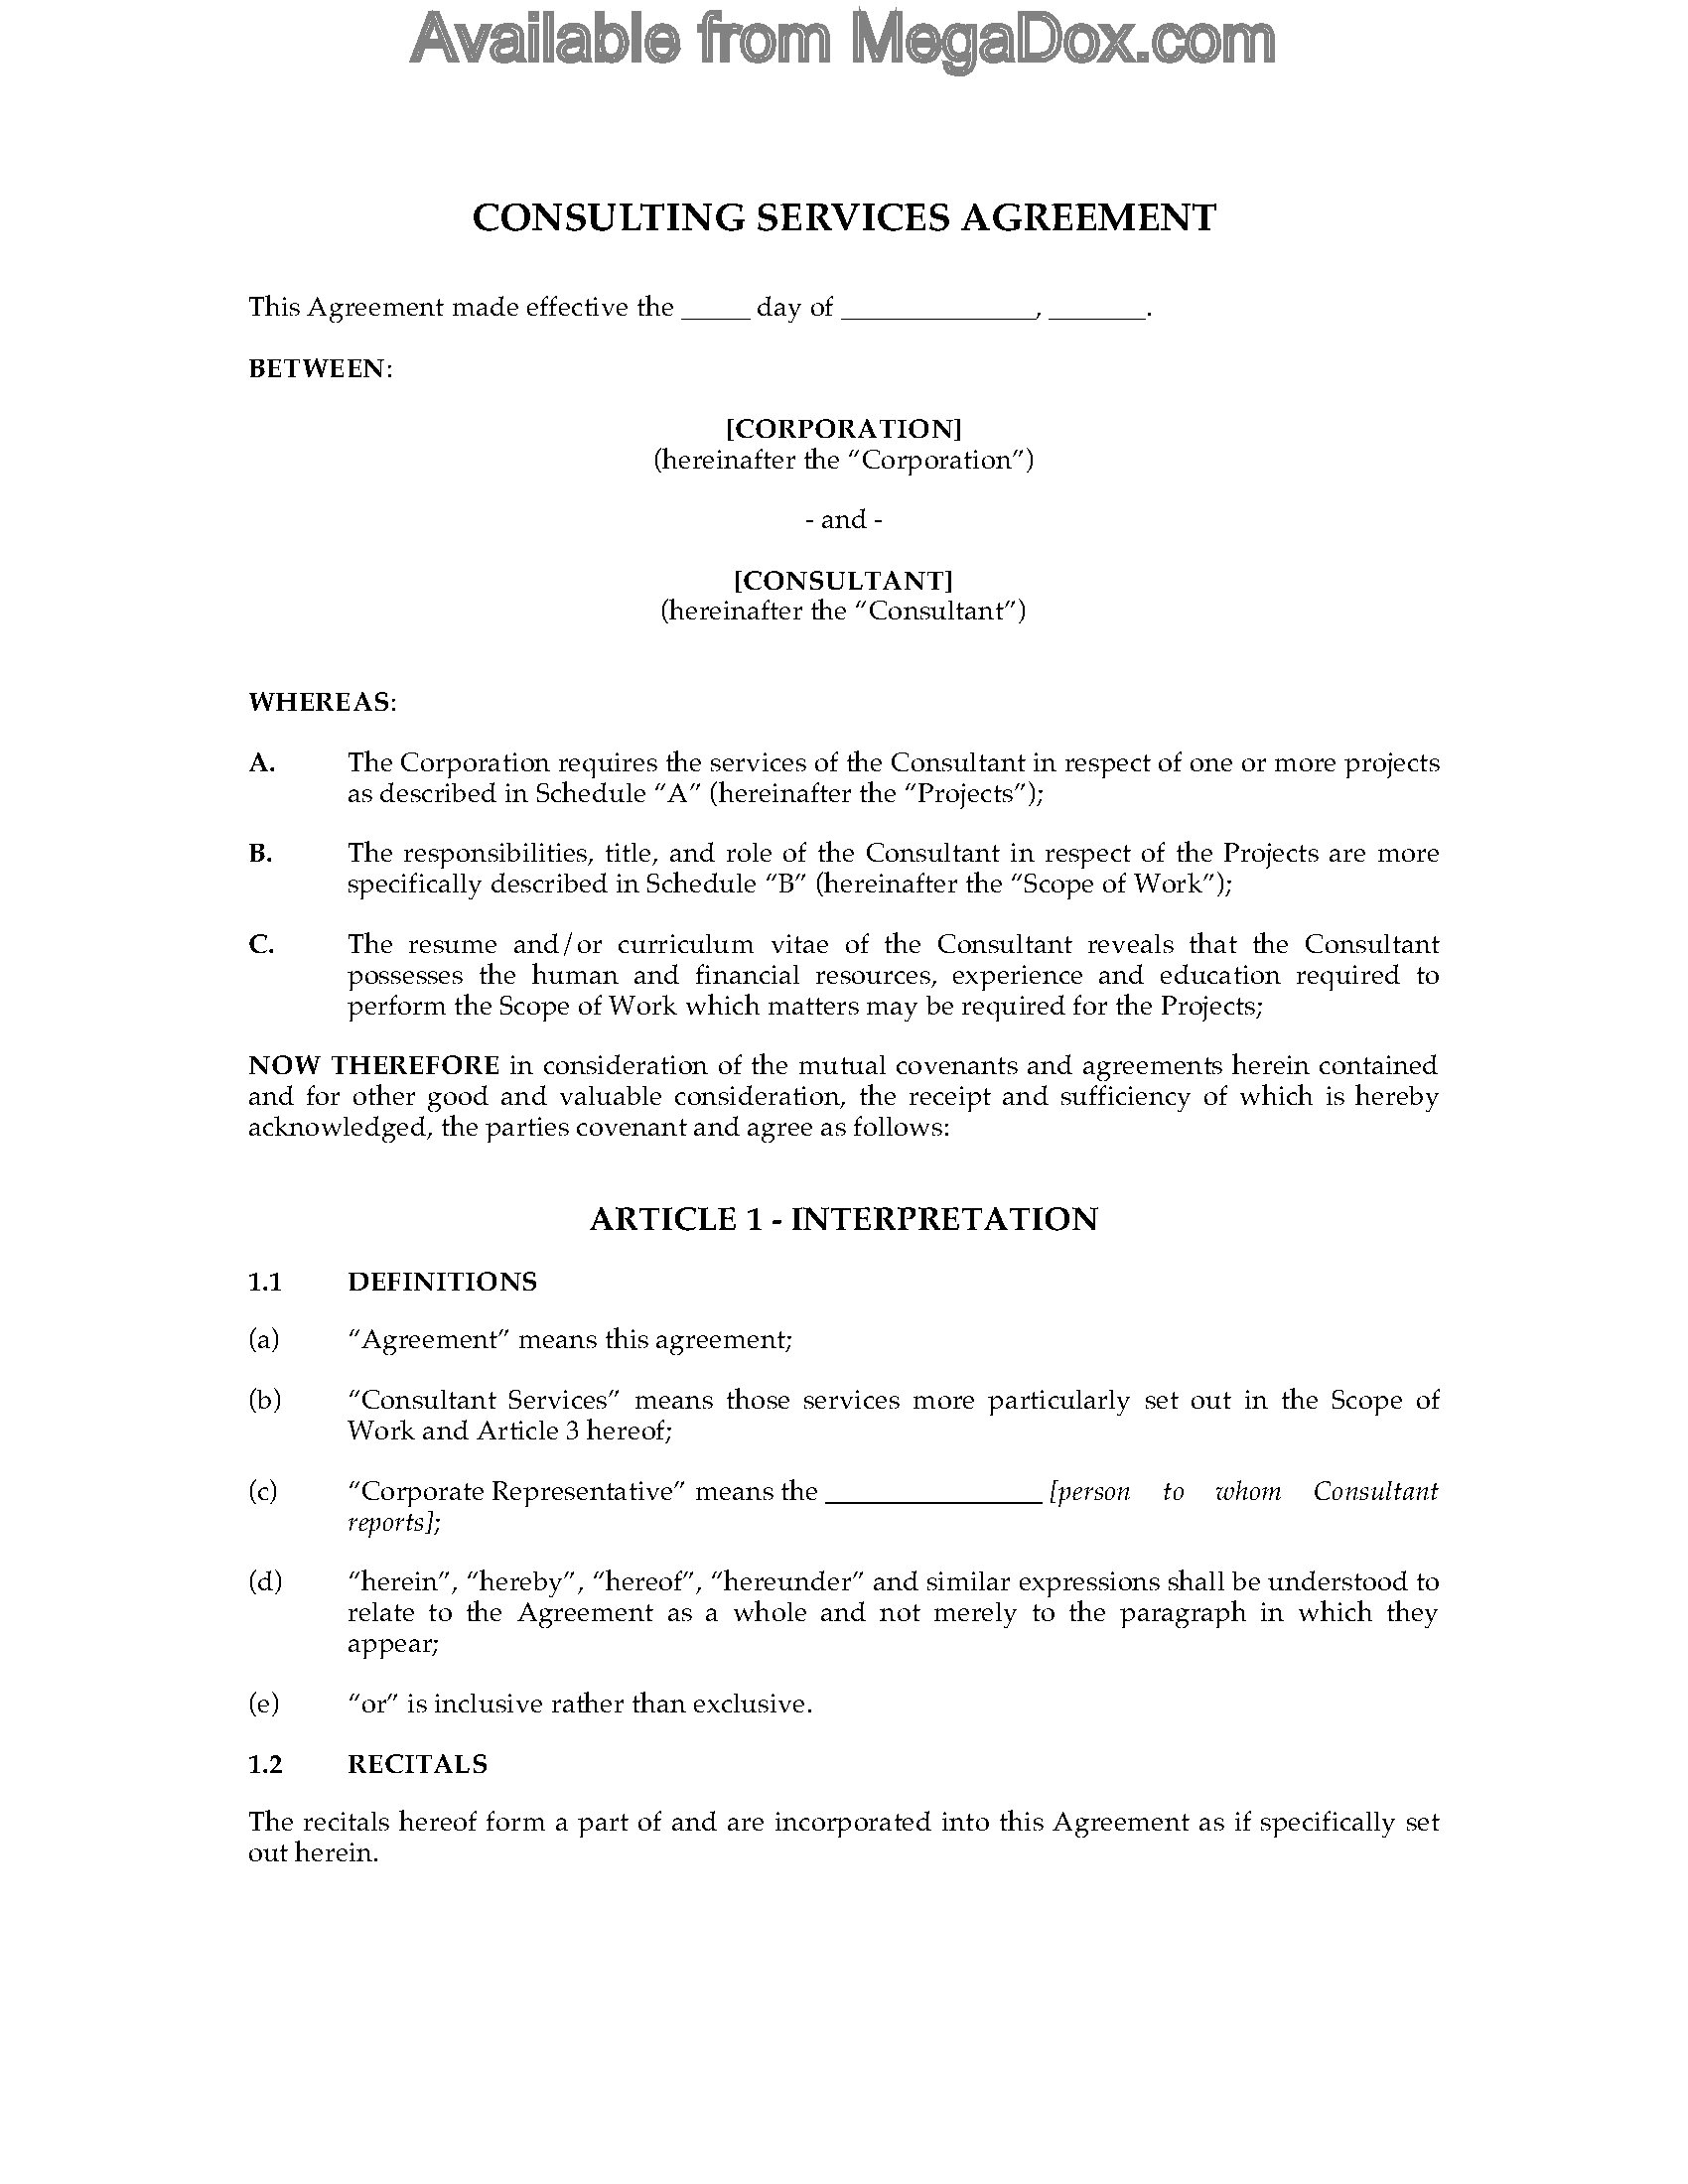 Consulting Contract Template Canada Canada Consulting Contract and Confidentiality Agreement